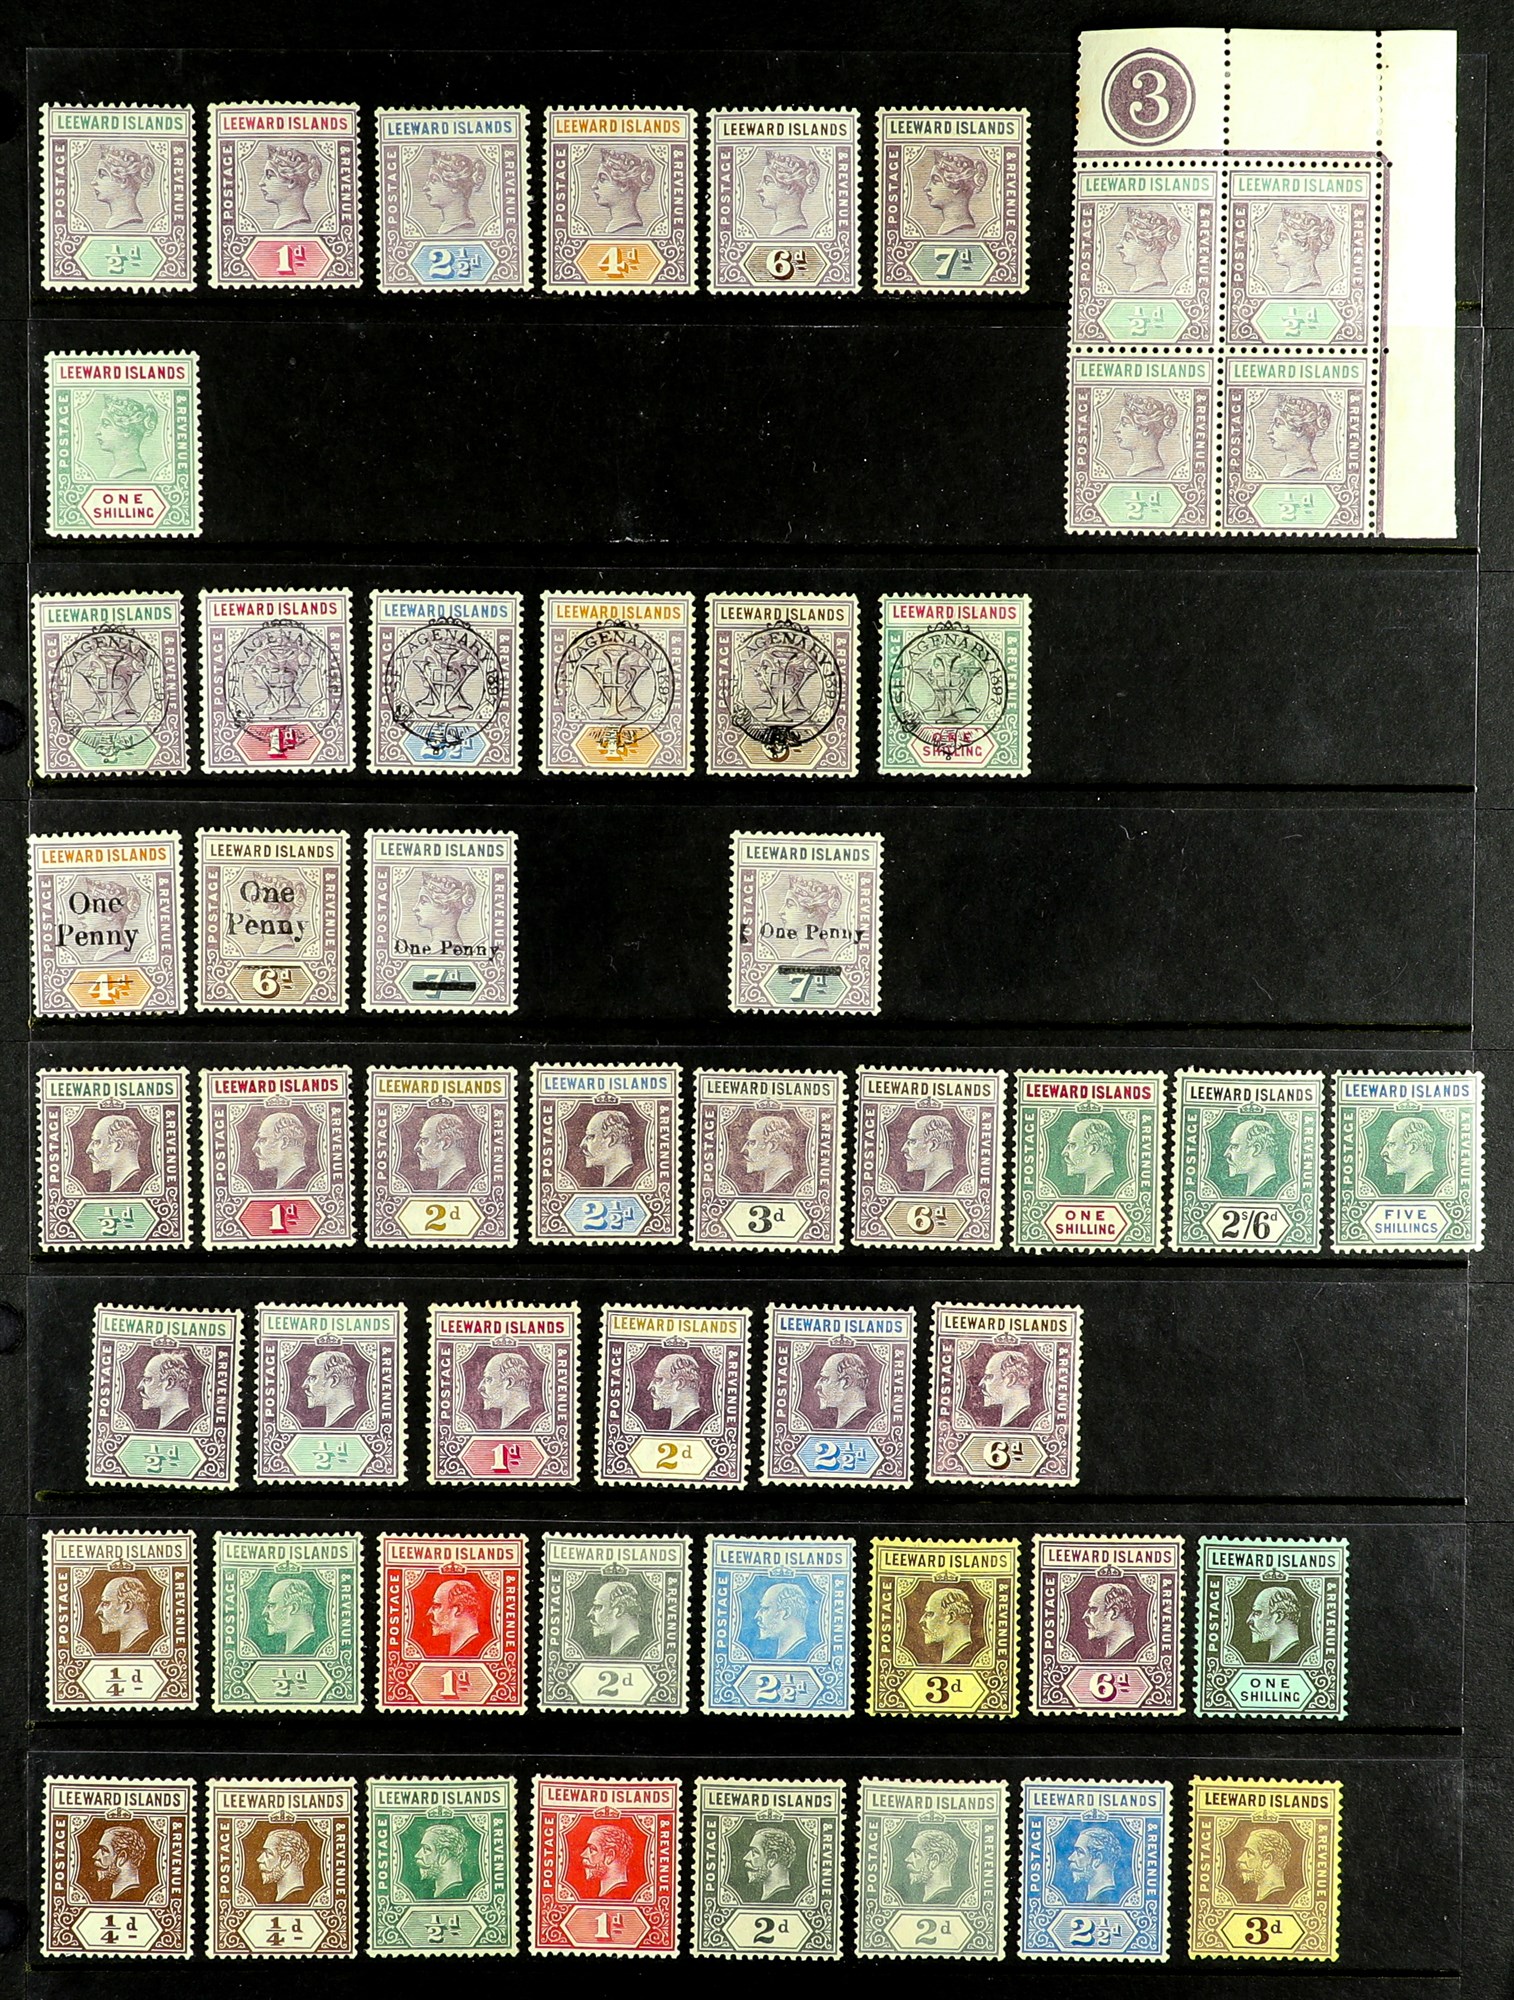 LEEWARD IS. 1890 - 1954 MINT COLLECTION of around 180 stamps on protective pages, comprehensive incl